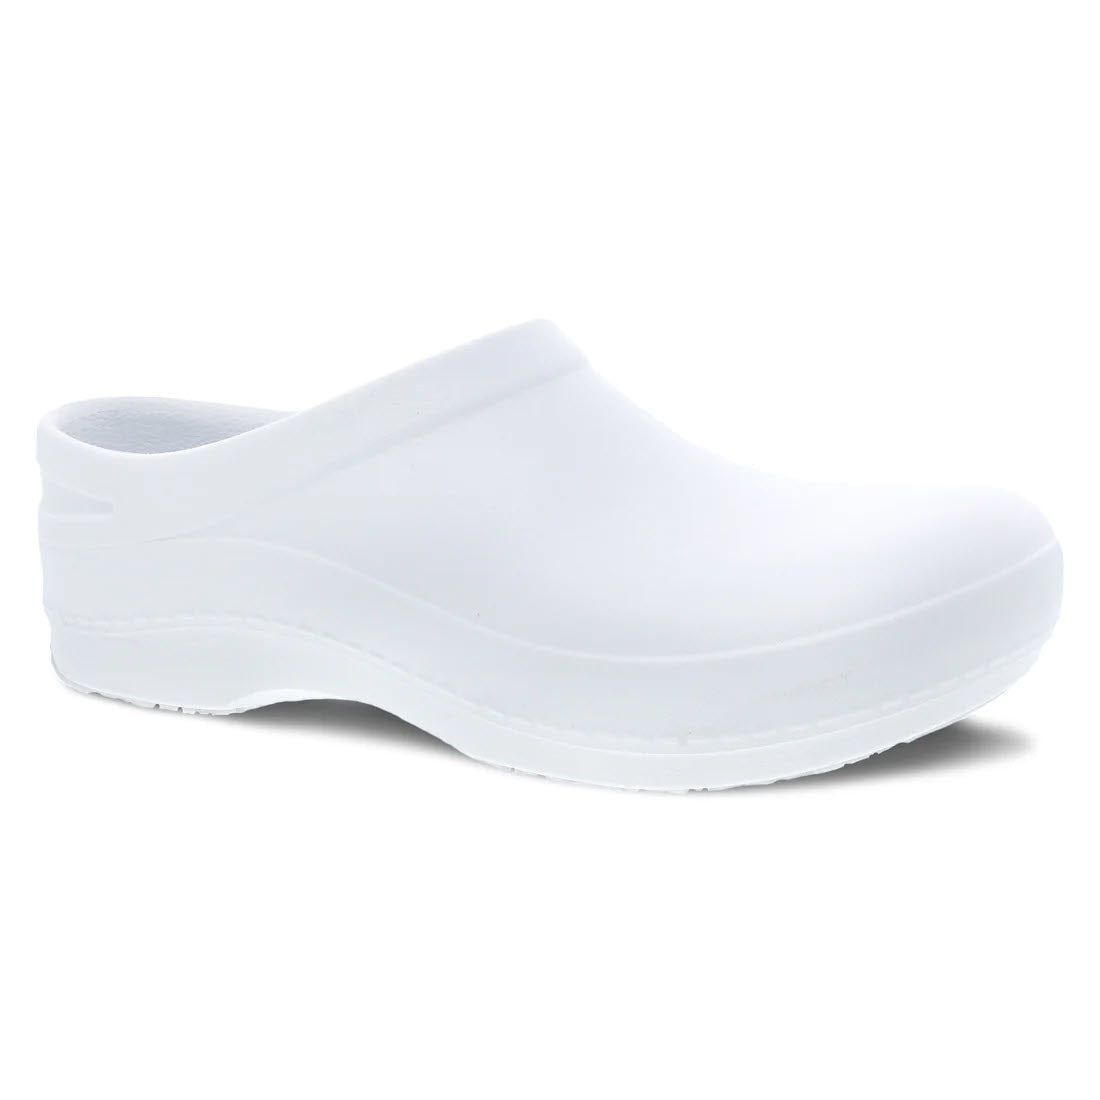 A white, slip-resistant clog-style work shoe with a Dansko Natural Arch® on a white background. - A DANSKO KACI WHITE - WOMENS on a white background.